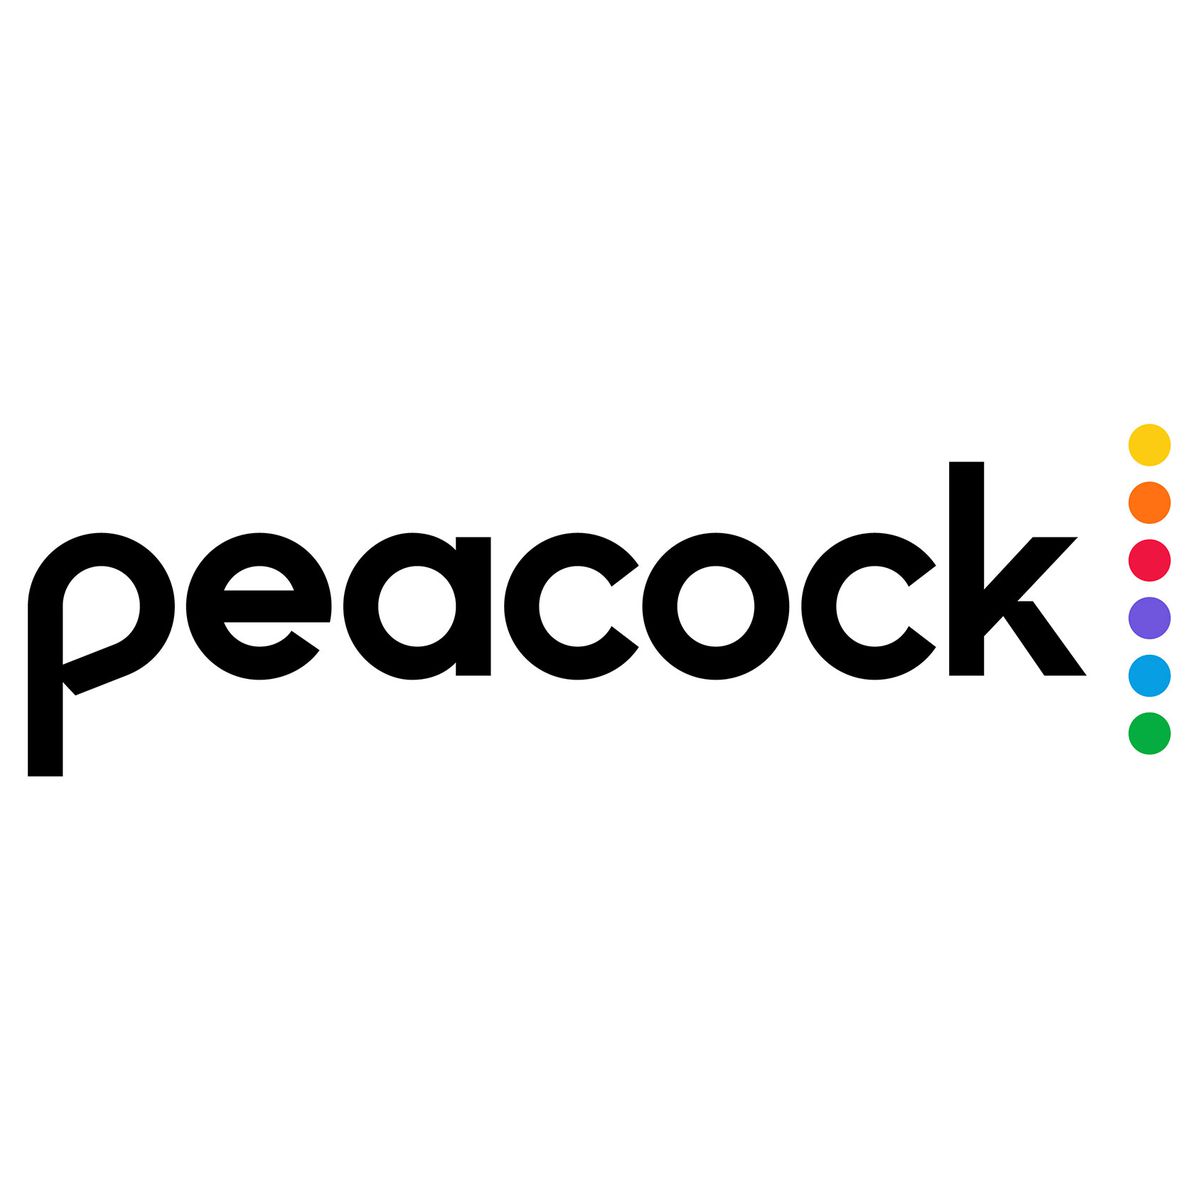 the peacock logo on a white background